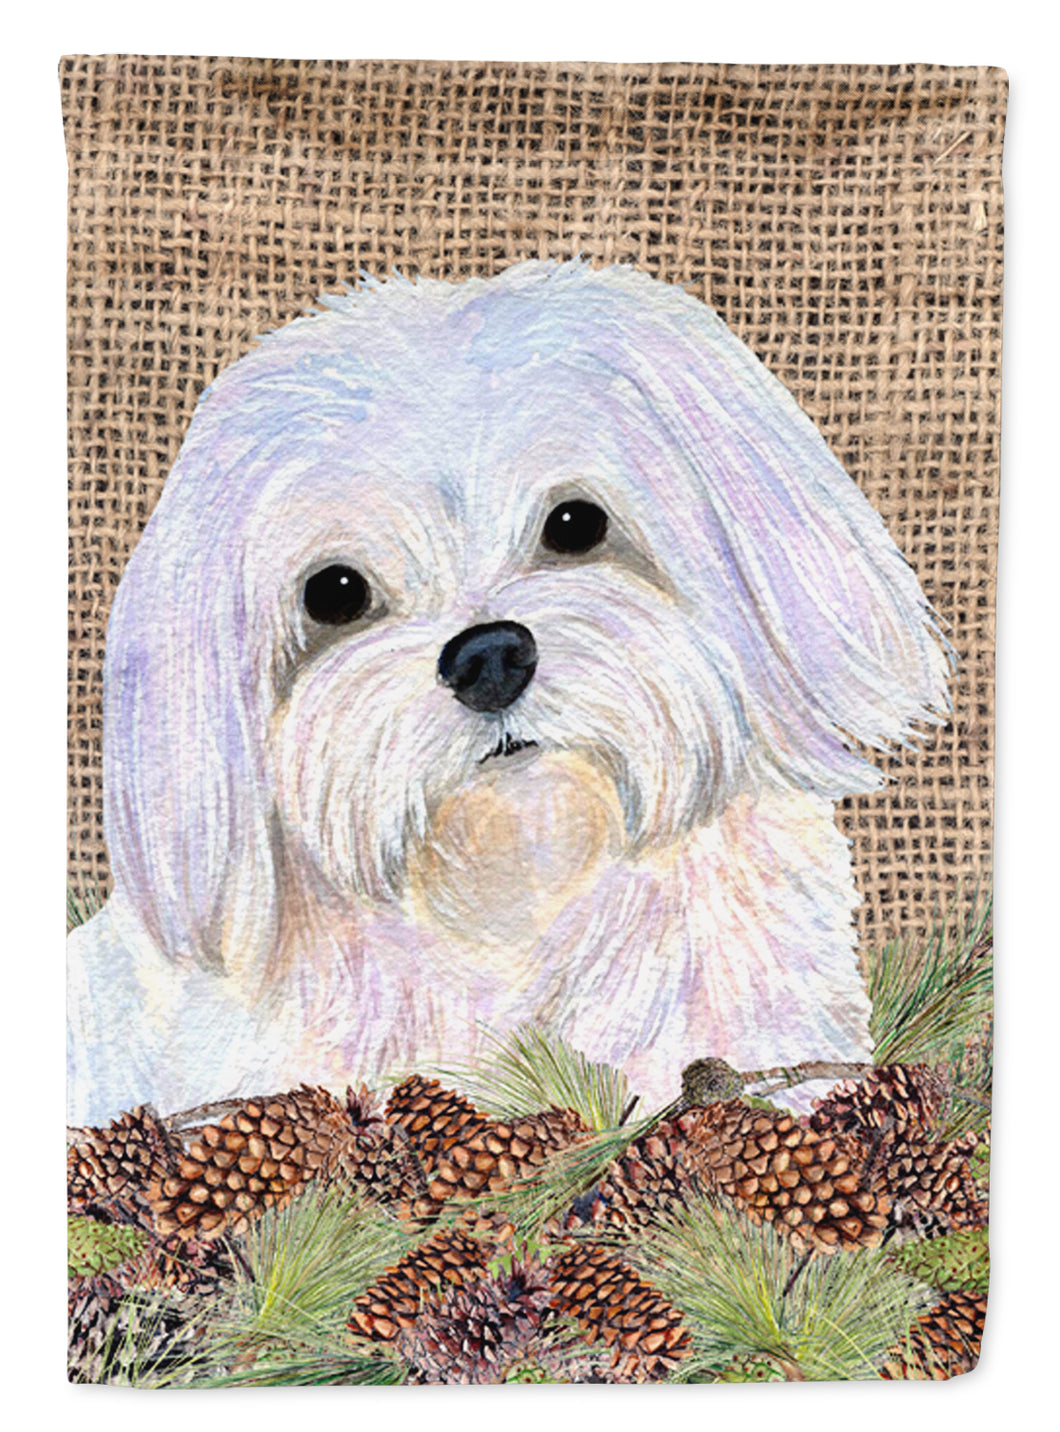 Maltese On Faux Burlap With Pine Cones Garden Flag 2-Sided 2-Ply